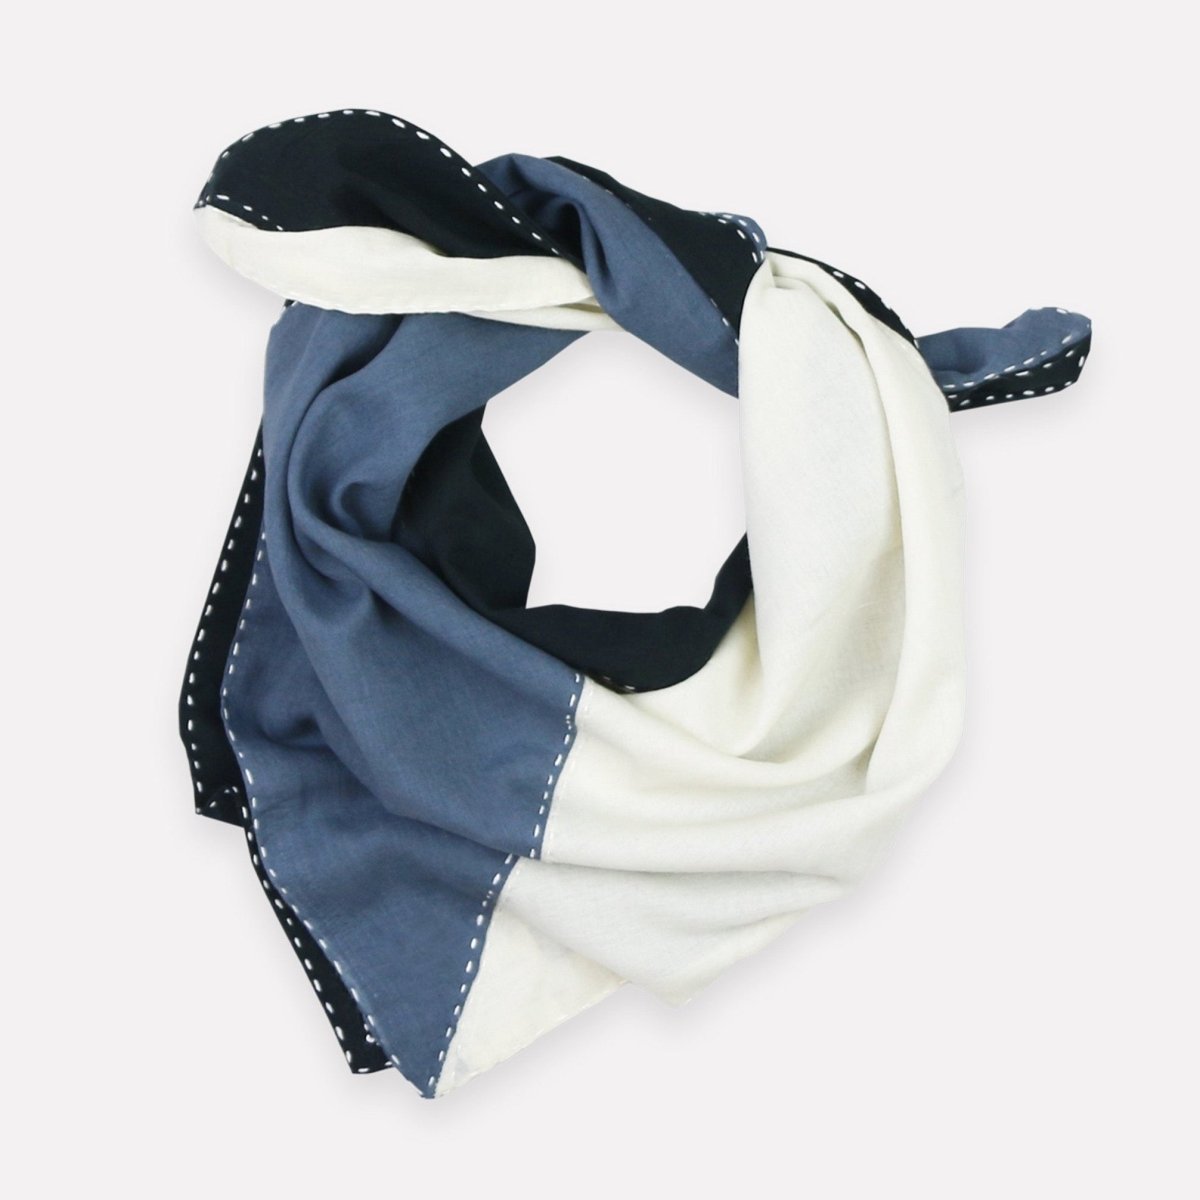 A blue, white and black color-blocked bandana with white stitching. The Colorblock Bandana in Asha is designed by Anchal in Louisville, Kentucky and made in Ajmer, India.